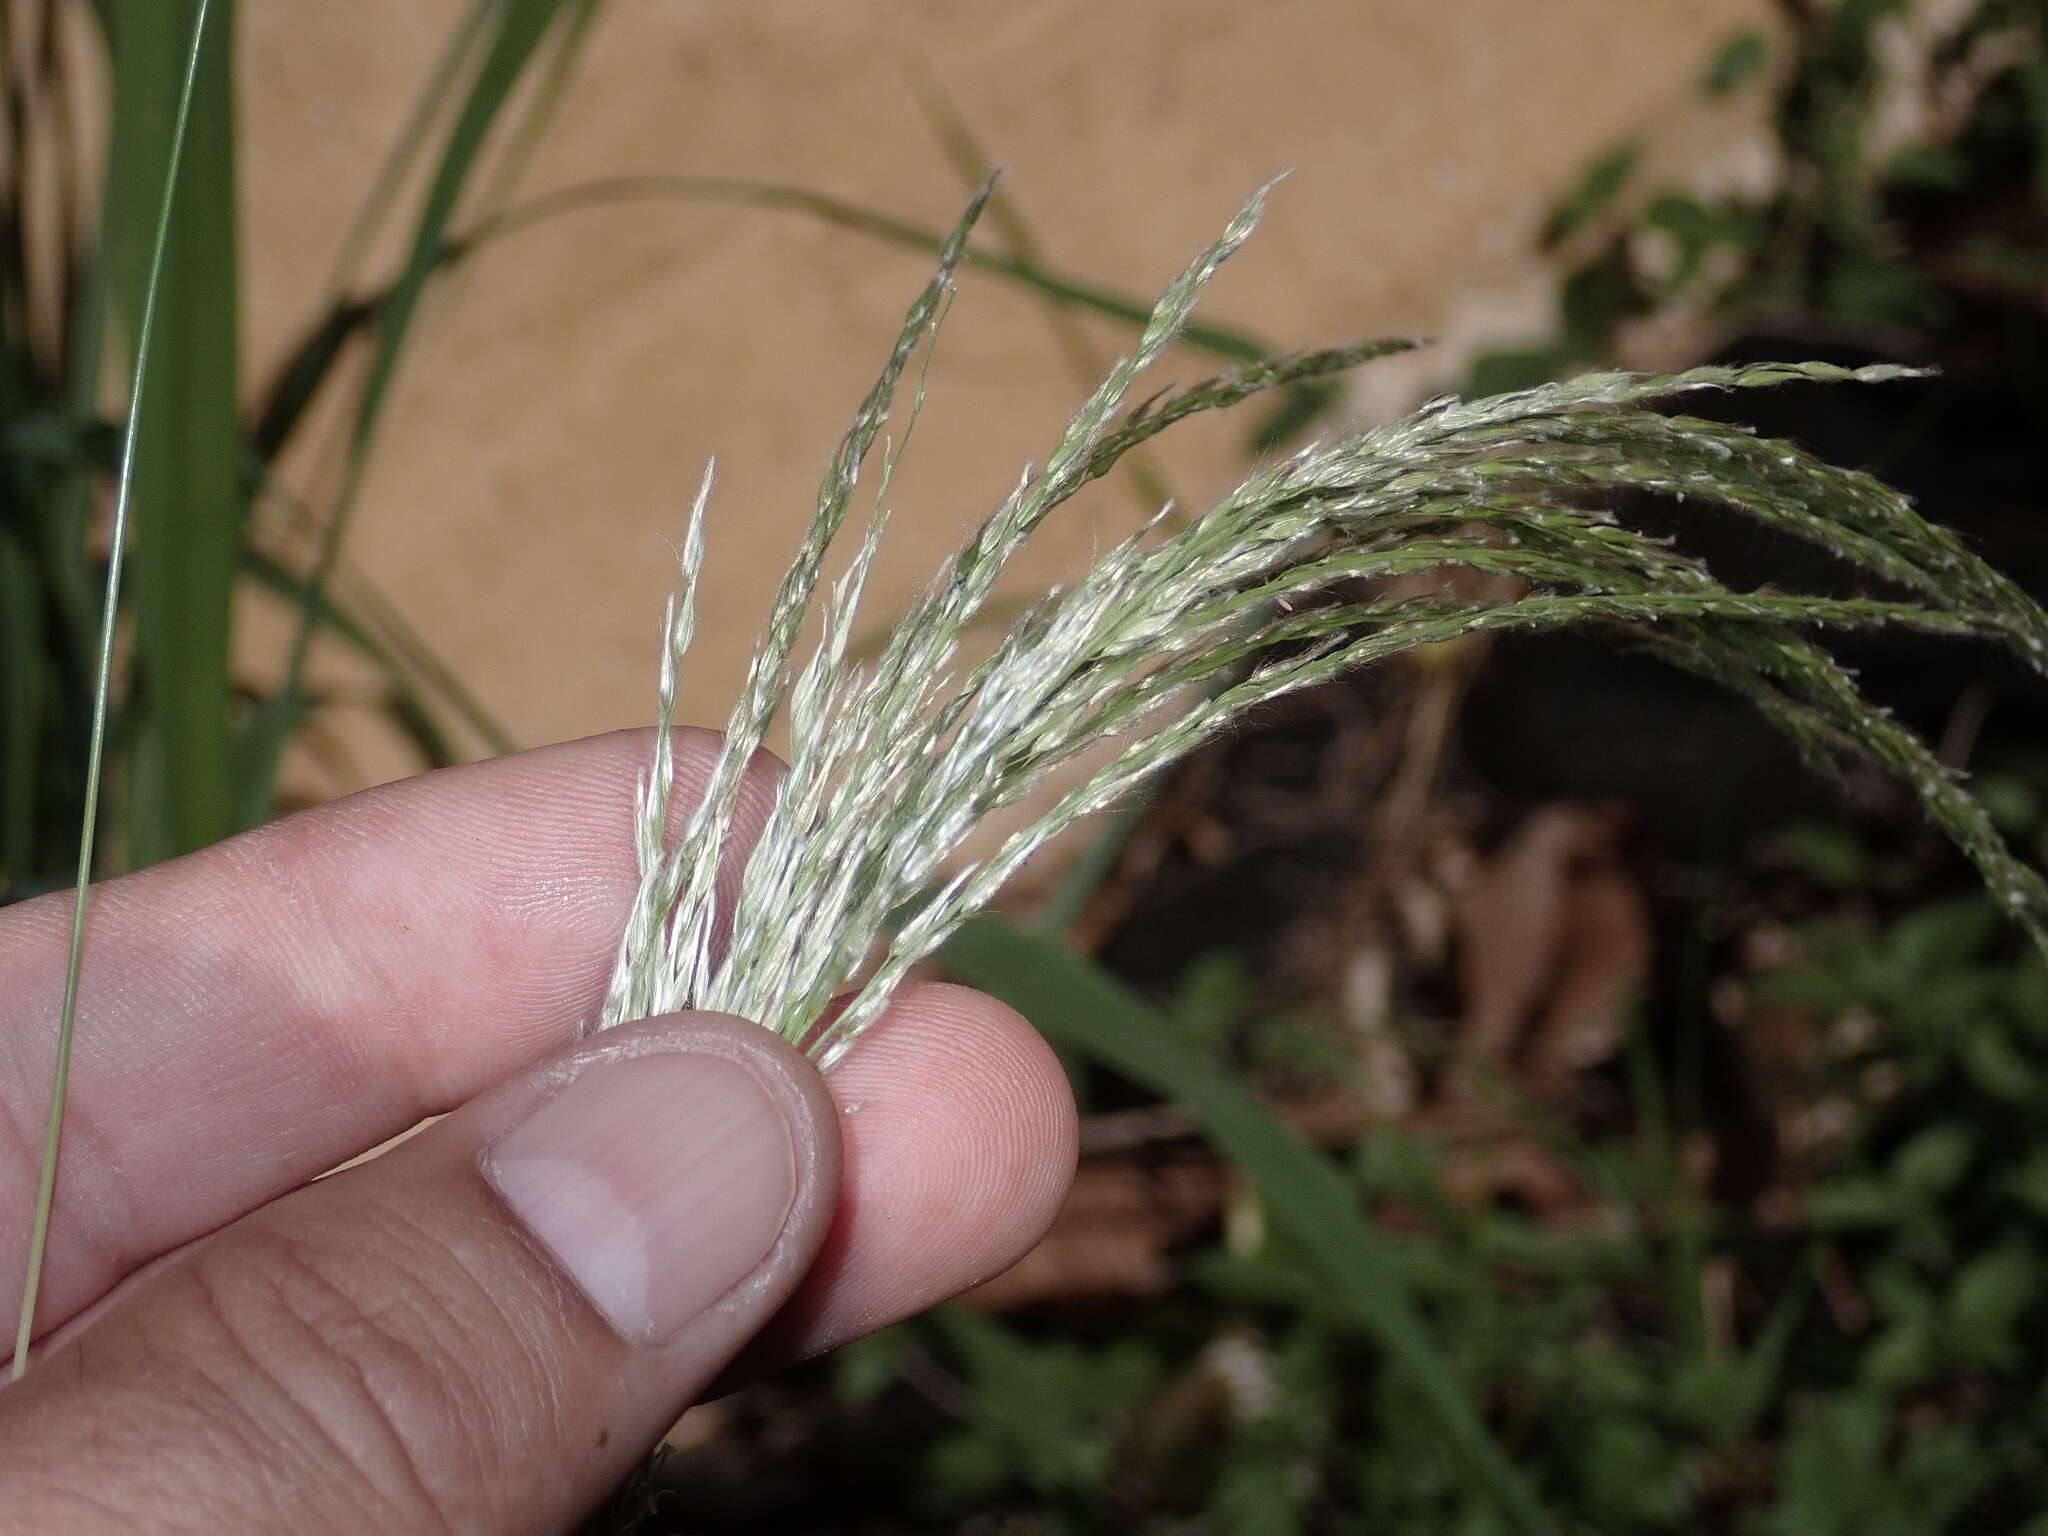 Image of sourgrass